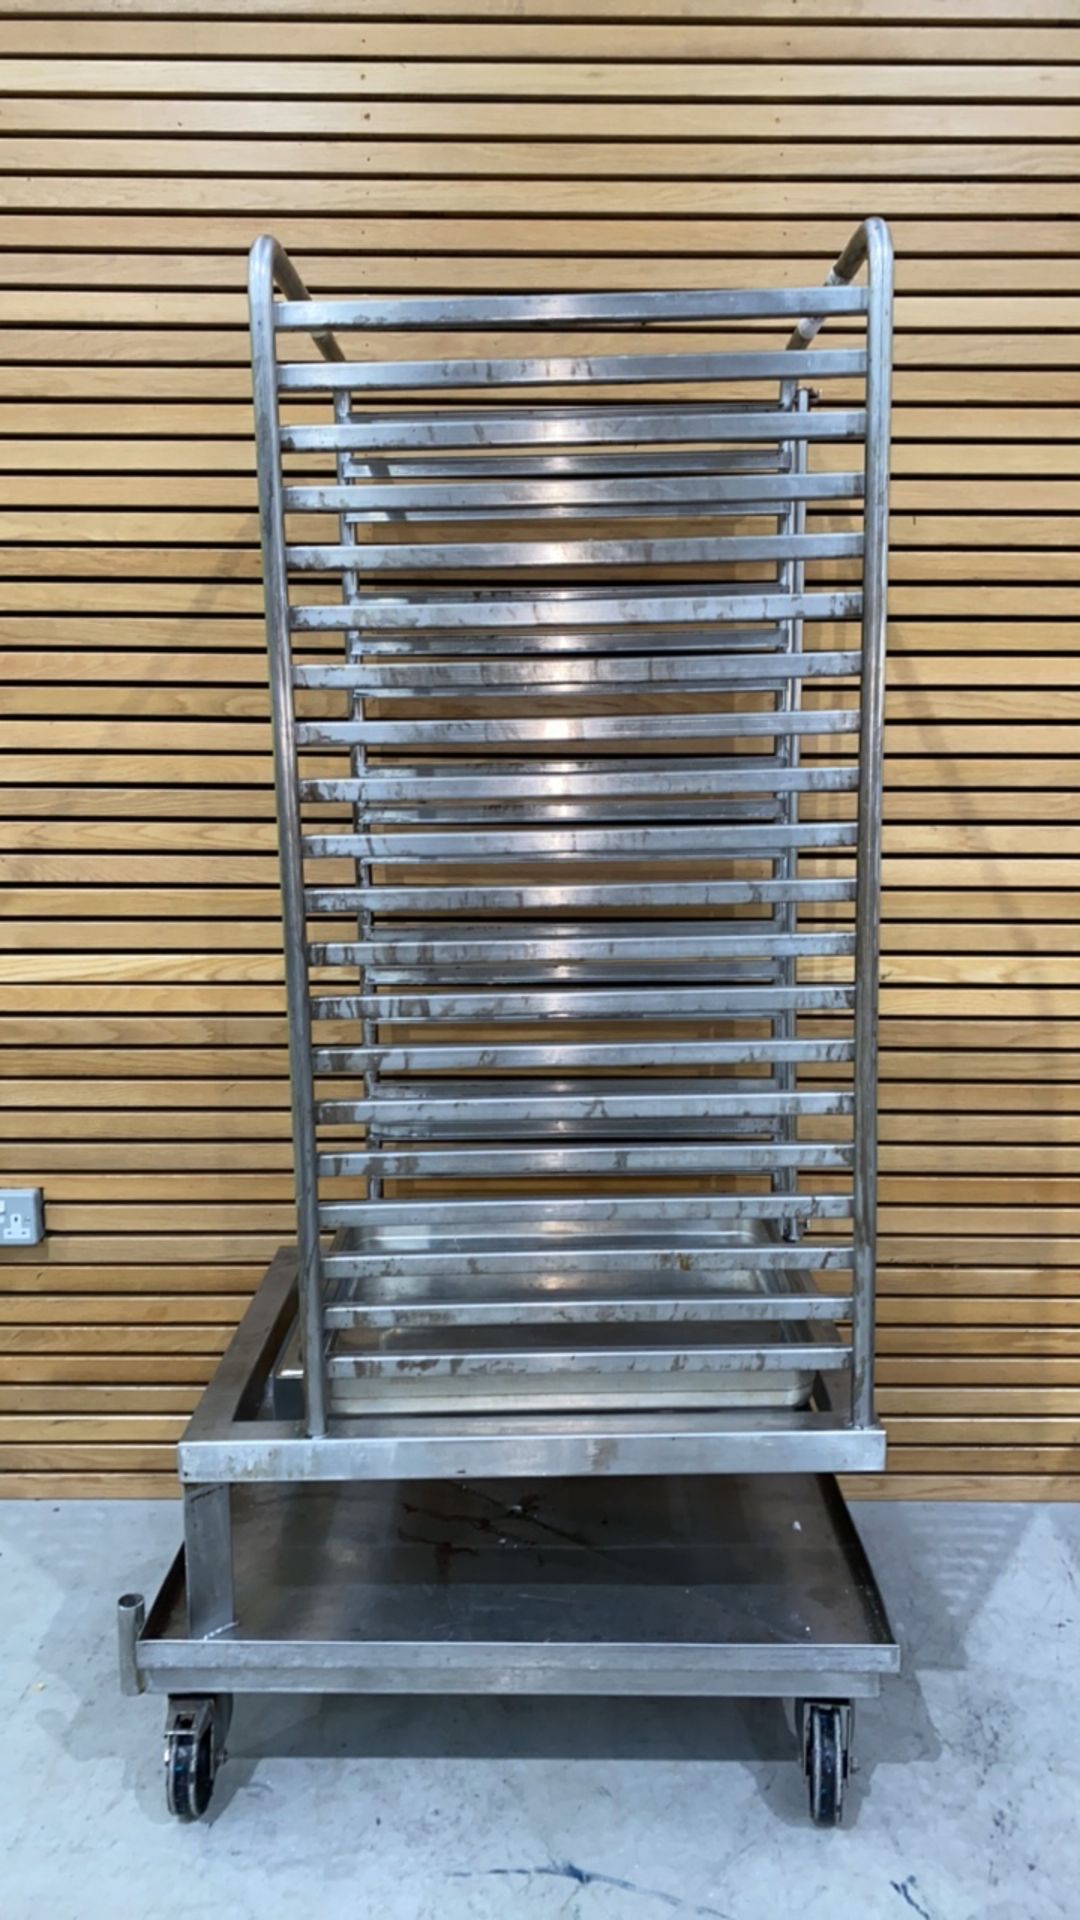 Rational Mobile Oven Rack 20 2/1 for Rational Oven - Image 2 of 3